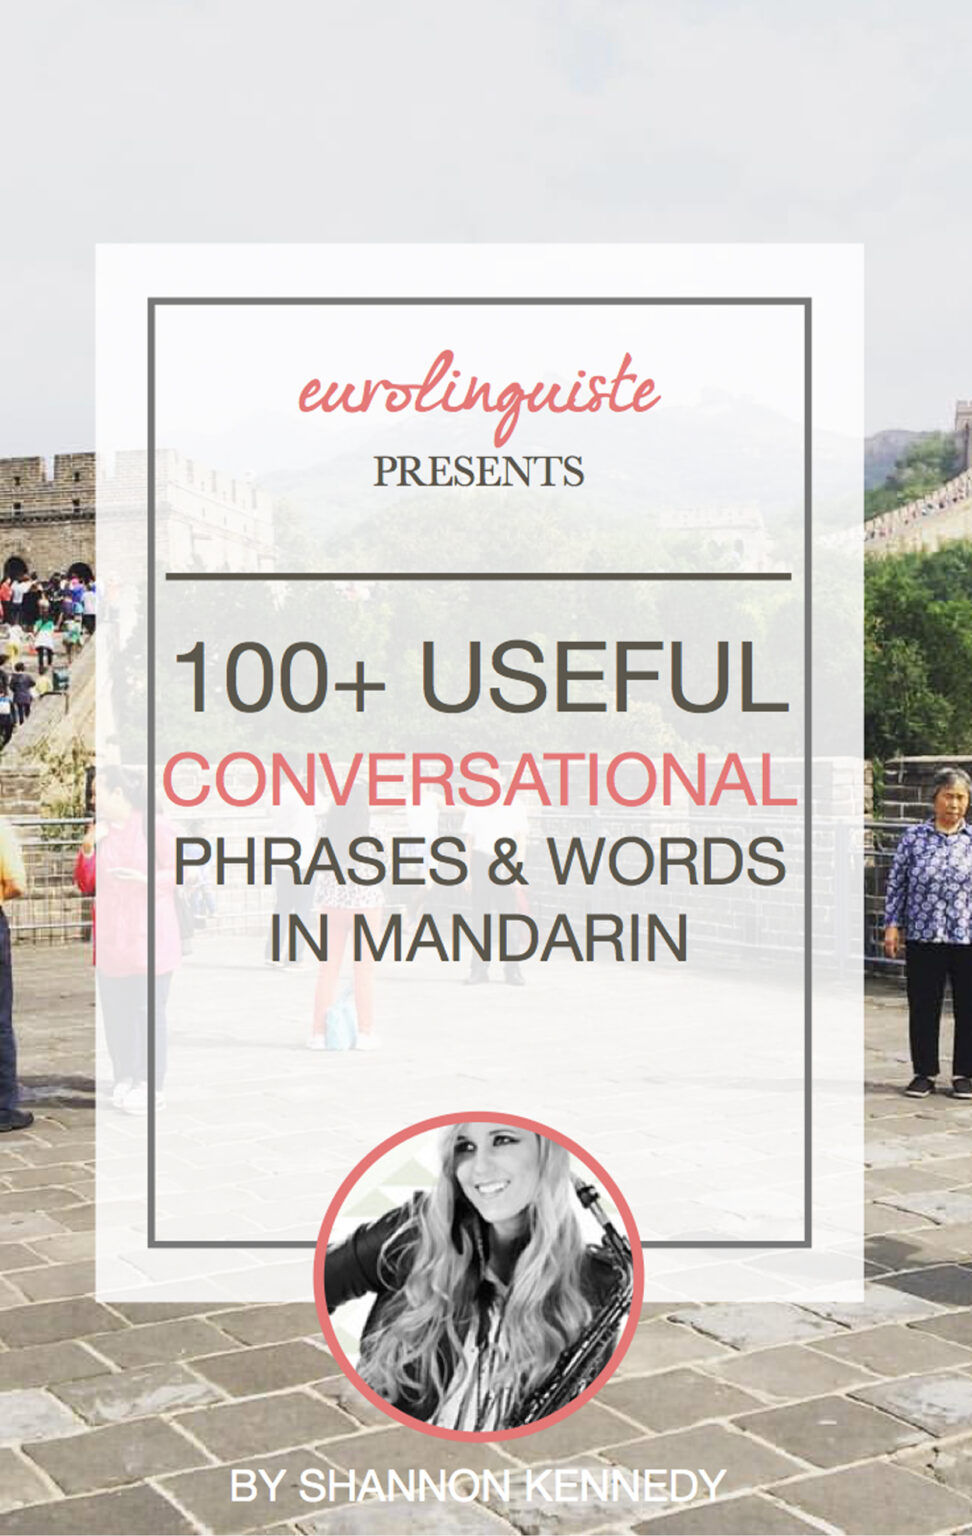 100 Useful Conversational Phrases And Words In Mandarin Chinese Eurolinguiste 